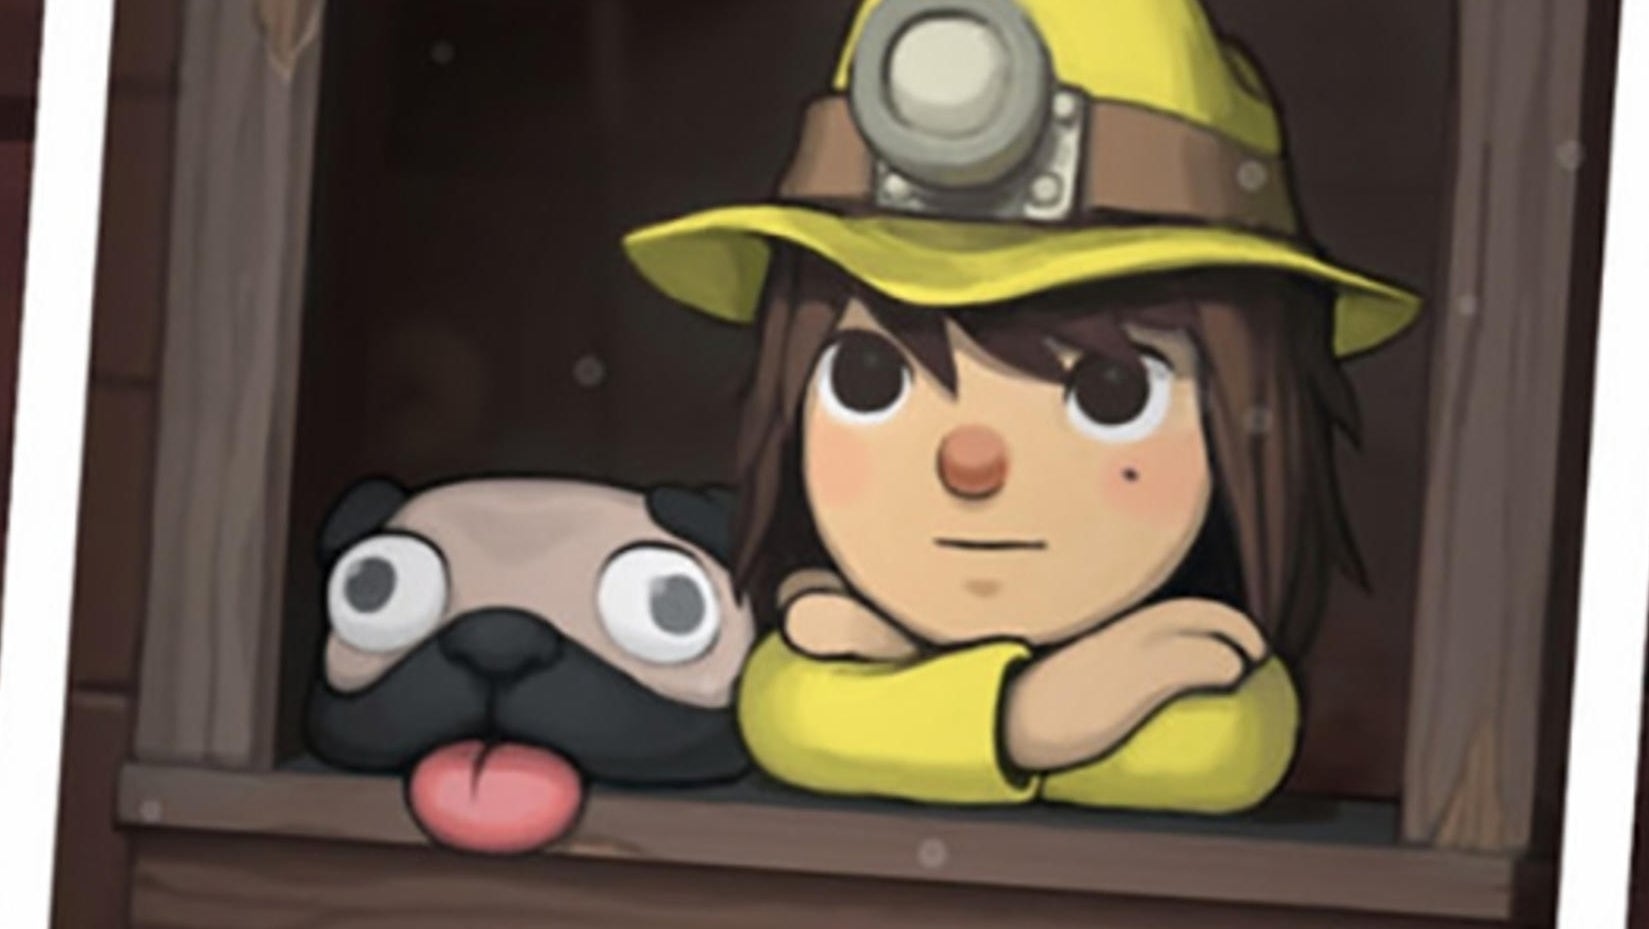 Image for Spelunky 2 has a cloning gun, flamethrower and turkeys